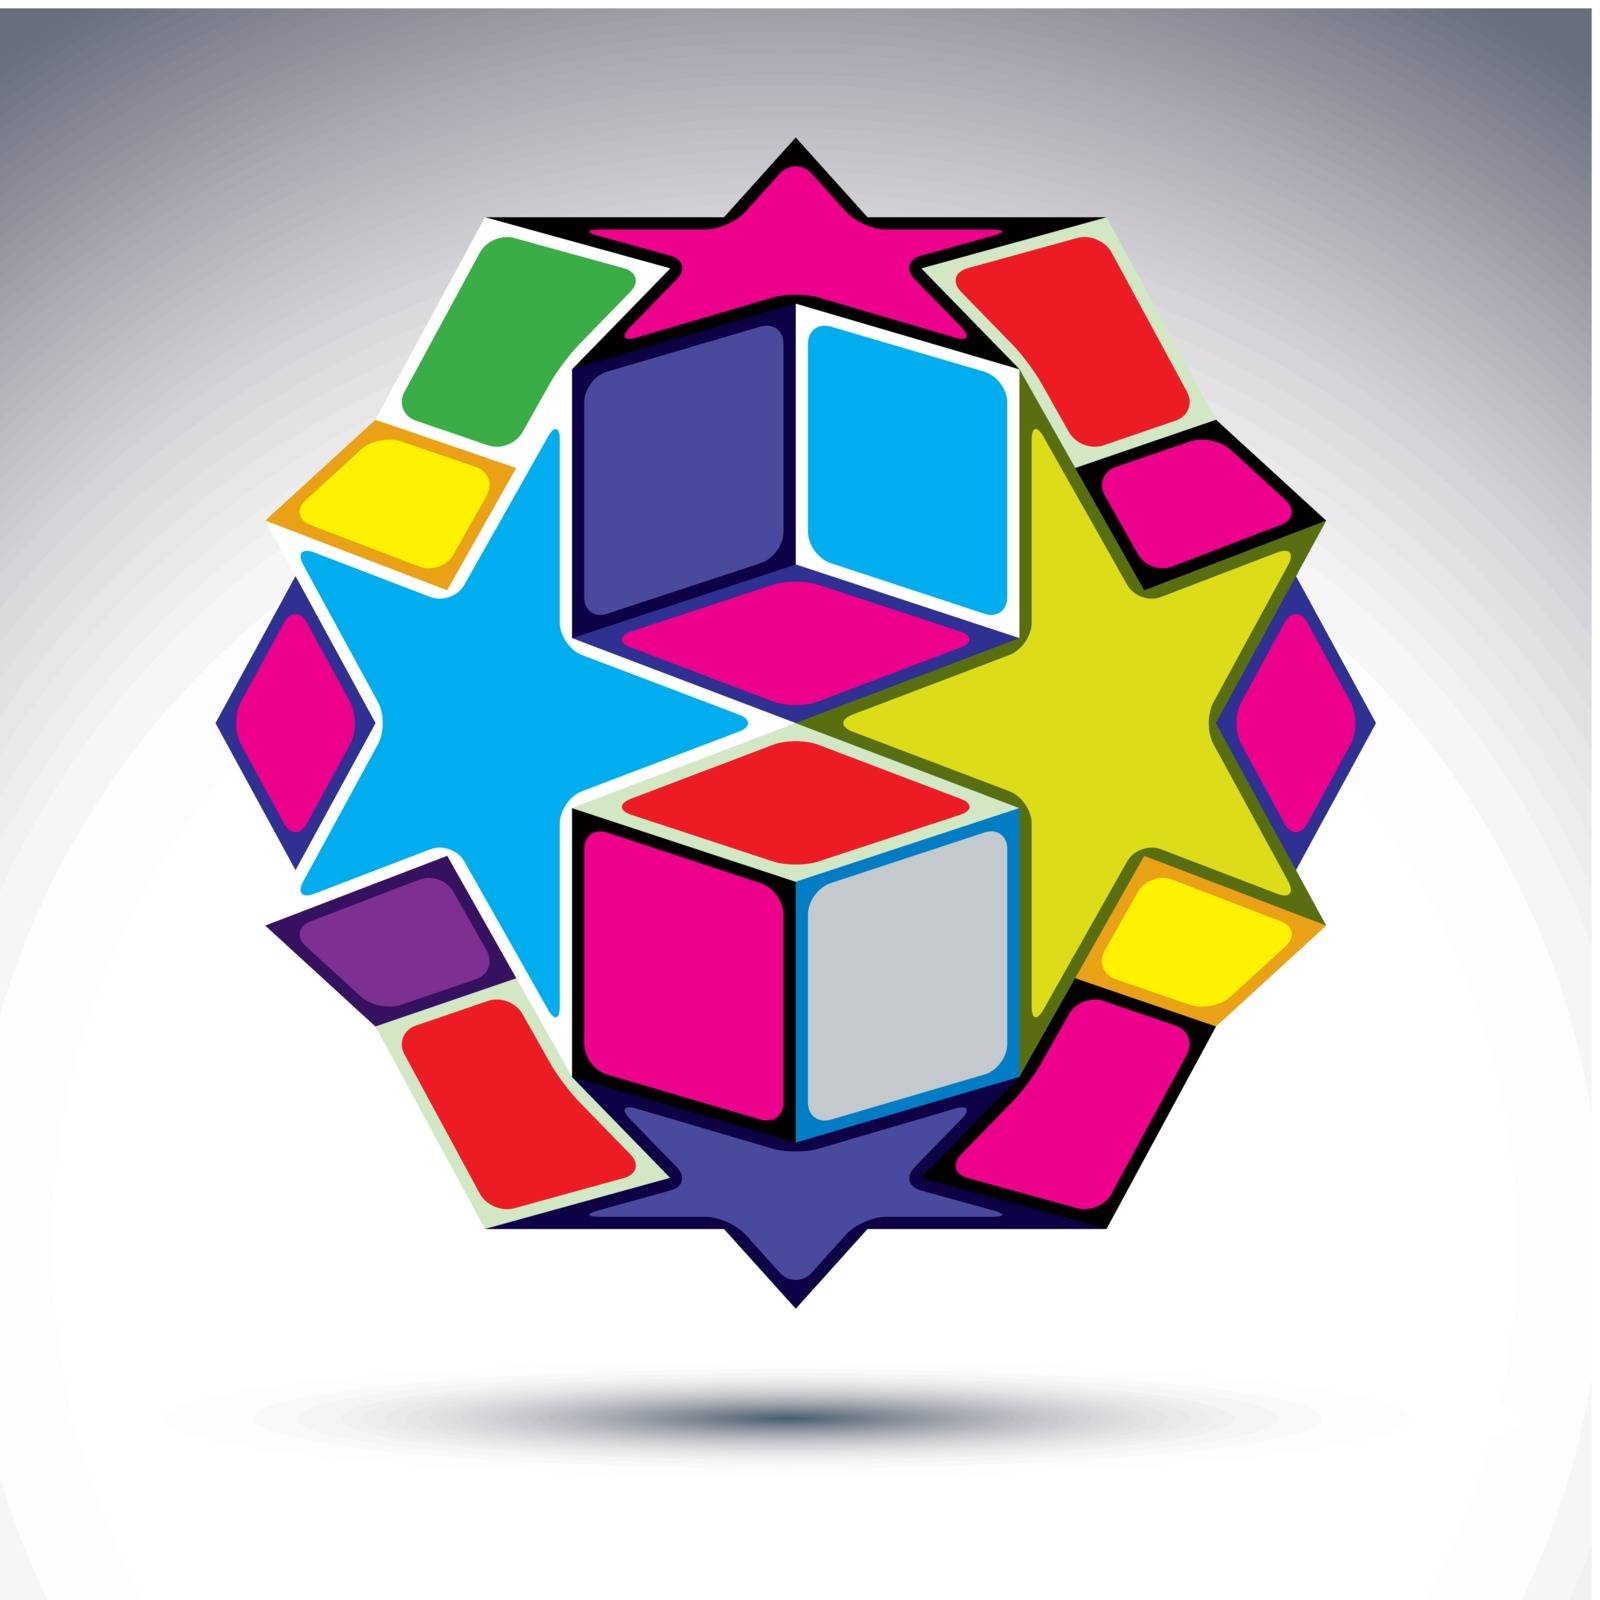 Rich 3d abstract figure constructed from geometric elements -stars and cubes. Vector fractal design object. 